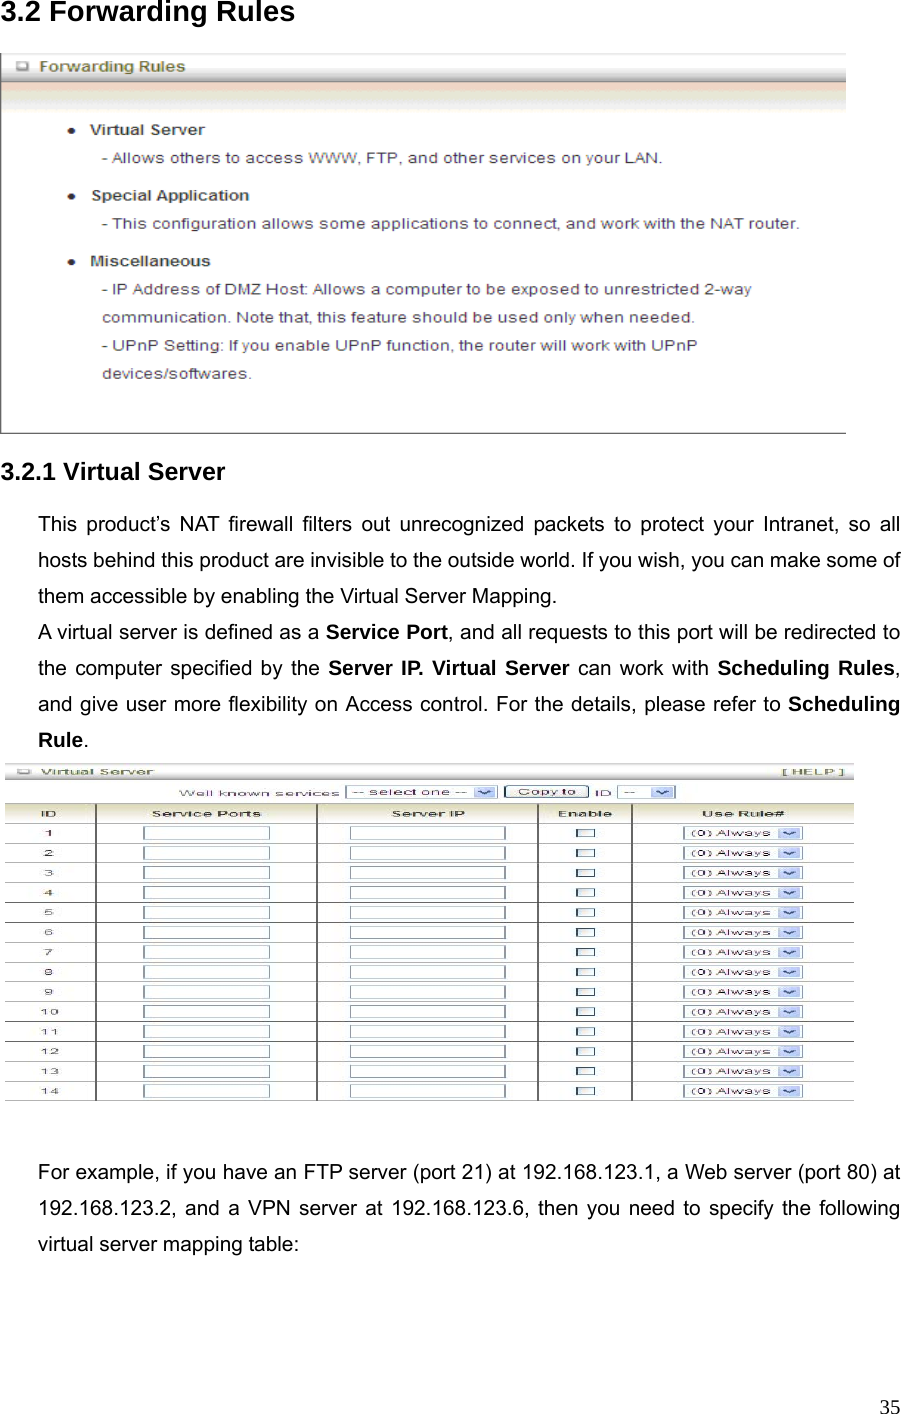  353.2 Forwarding Rules    3.2.1 Virtual Server  This product’s NAT firewall filters out unrecognized packets to protect your Intranet, so all hosts behind this product are invisible to the outside world. If you wish, you can make some of them accessible by enabling the Virtual Server Mapping. A virtual server is defined as a Service Port, and all requests to this port will be redirected to the computer specified by the Server IP. Virtual Server can work with Scheduling Rules, and give user more flexibility on Access control. For the details, please refer to Scheduling Rule.    For example, if you have an FTP server (port 21) at 192.168.123.1, a Web server (port 80) at 192.168.123.2, and a VPN server at 192.168.123.6, then you need to specify the following virtual server mapping table:   